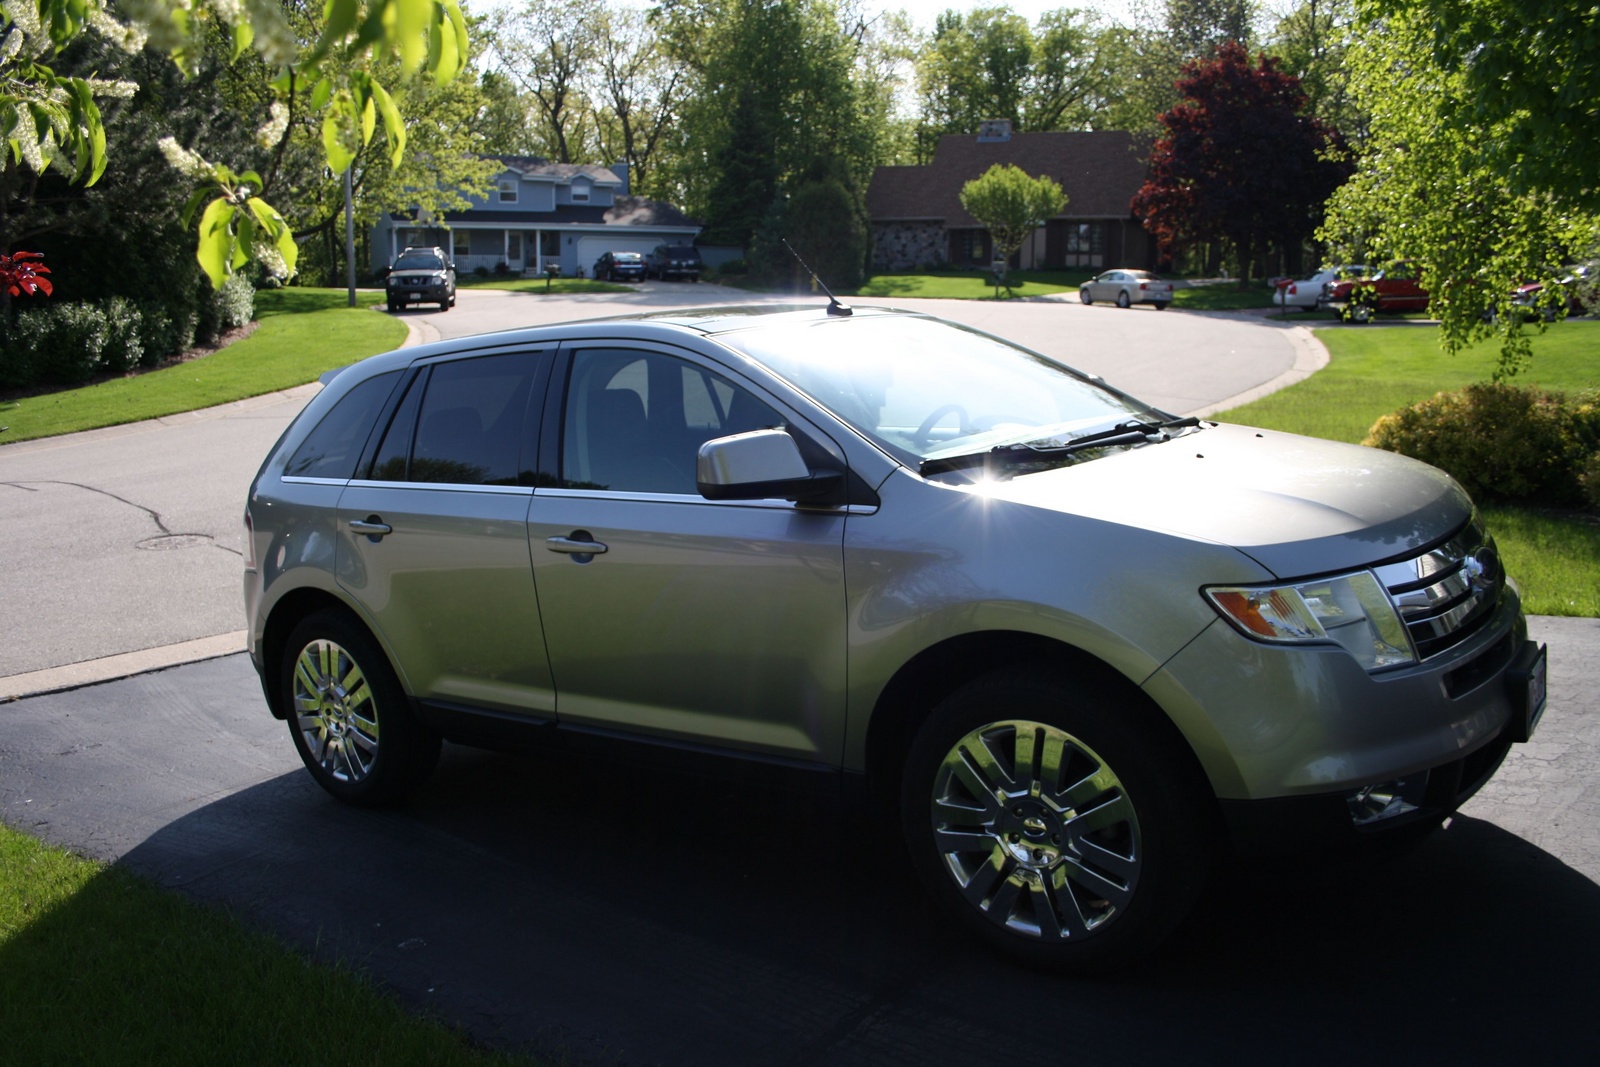 08 Ford edge towing capacity #4